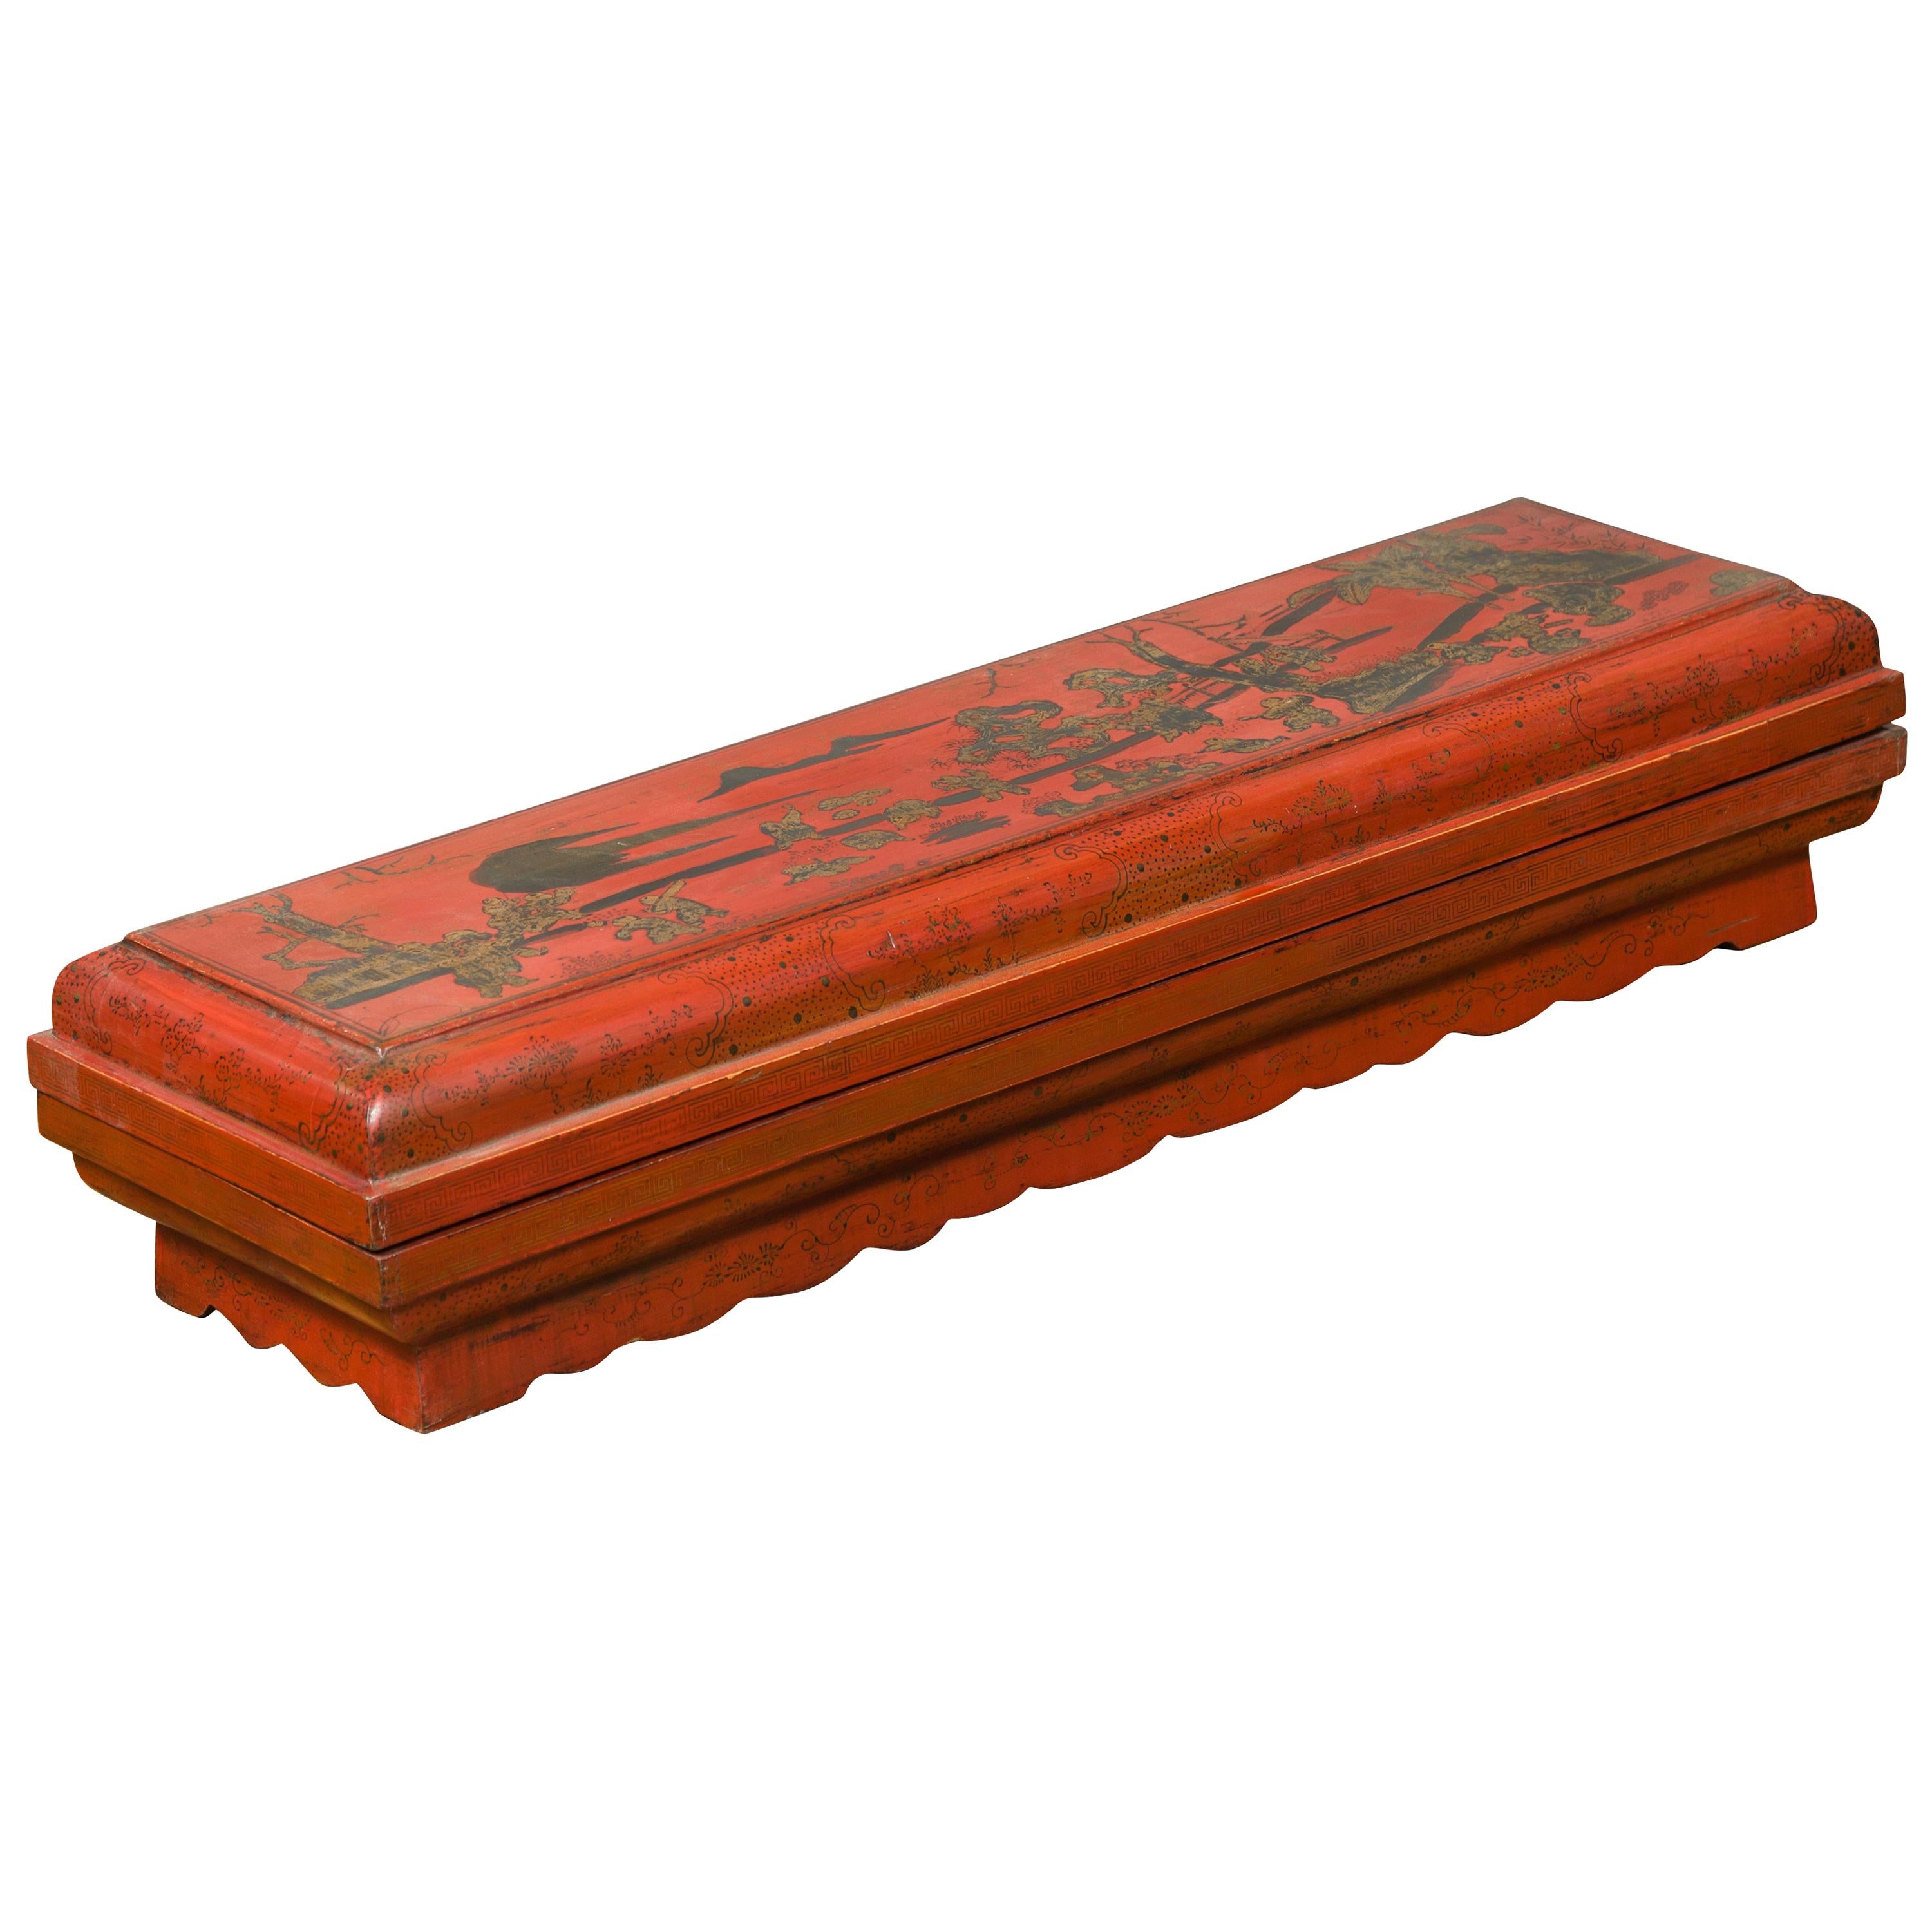 Qing Dynasty Red Lacquered Scroll Box with Distressed Gold Chinoiserie Décor